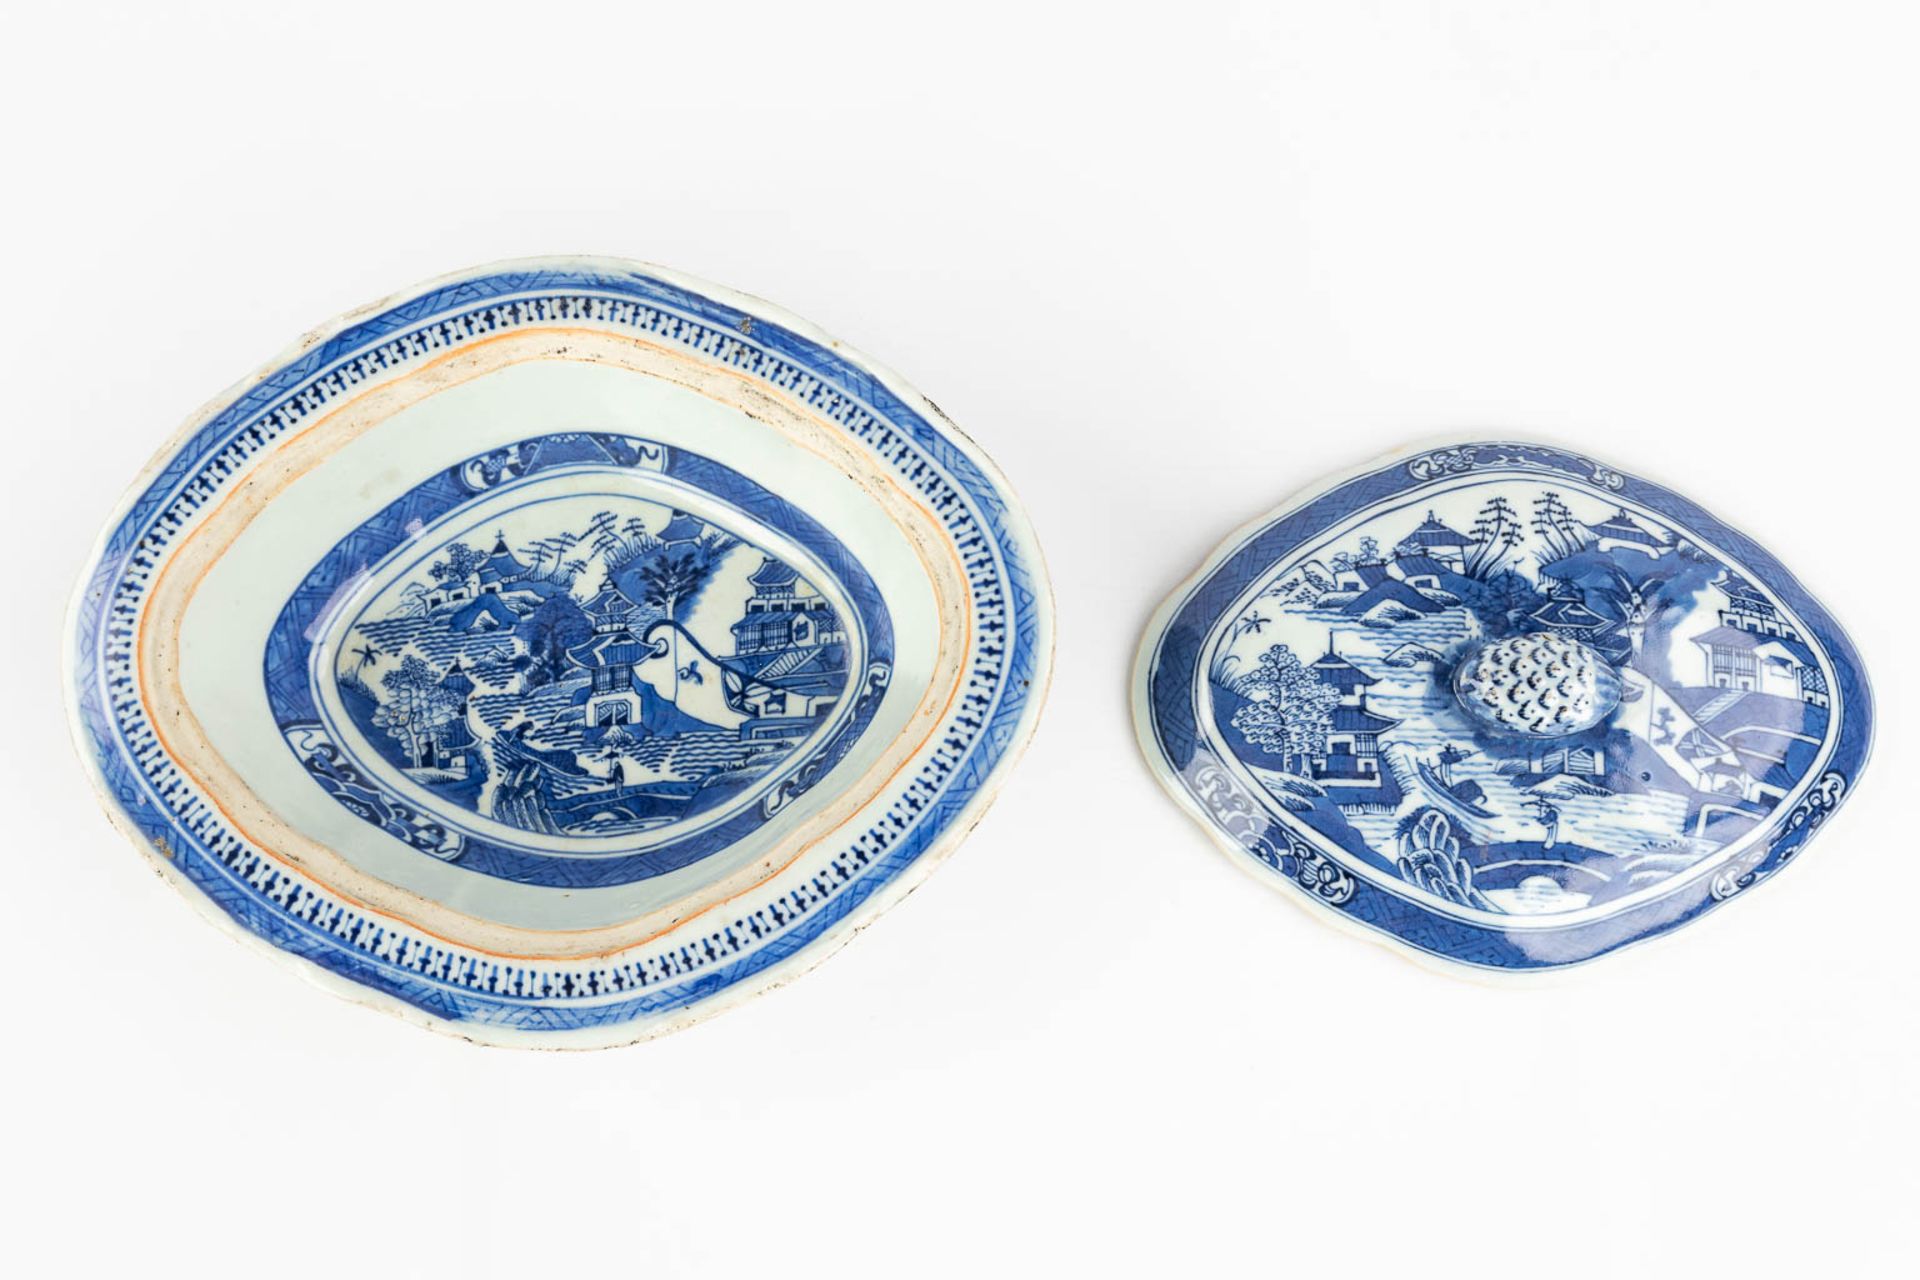 A Chinese bowl with a lid and blue-white landscape decor. 19th C. (L: 21,5 x W: 26,5 x H: 10 cm) - Image 8 of 15